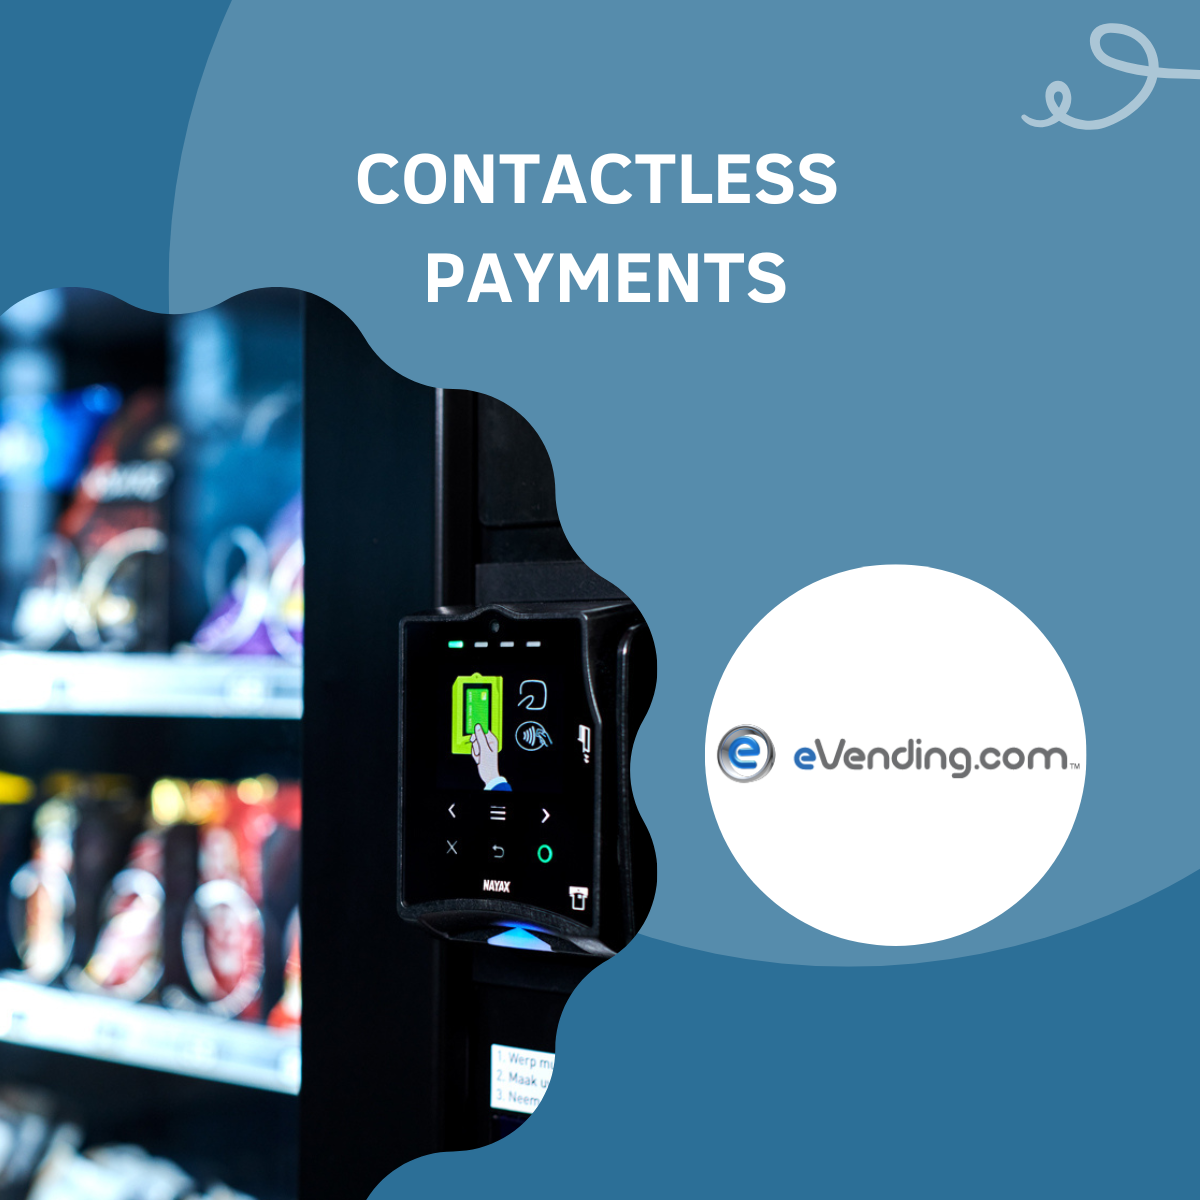 REDUCING COVID-19 EXPOSURE WITH CONTACTLESS PAYMENTS